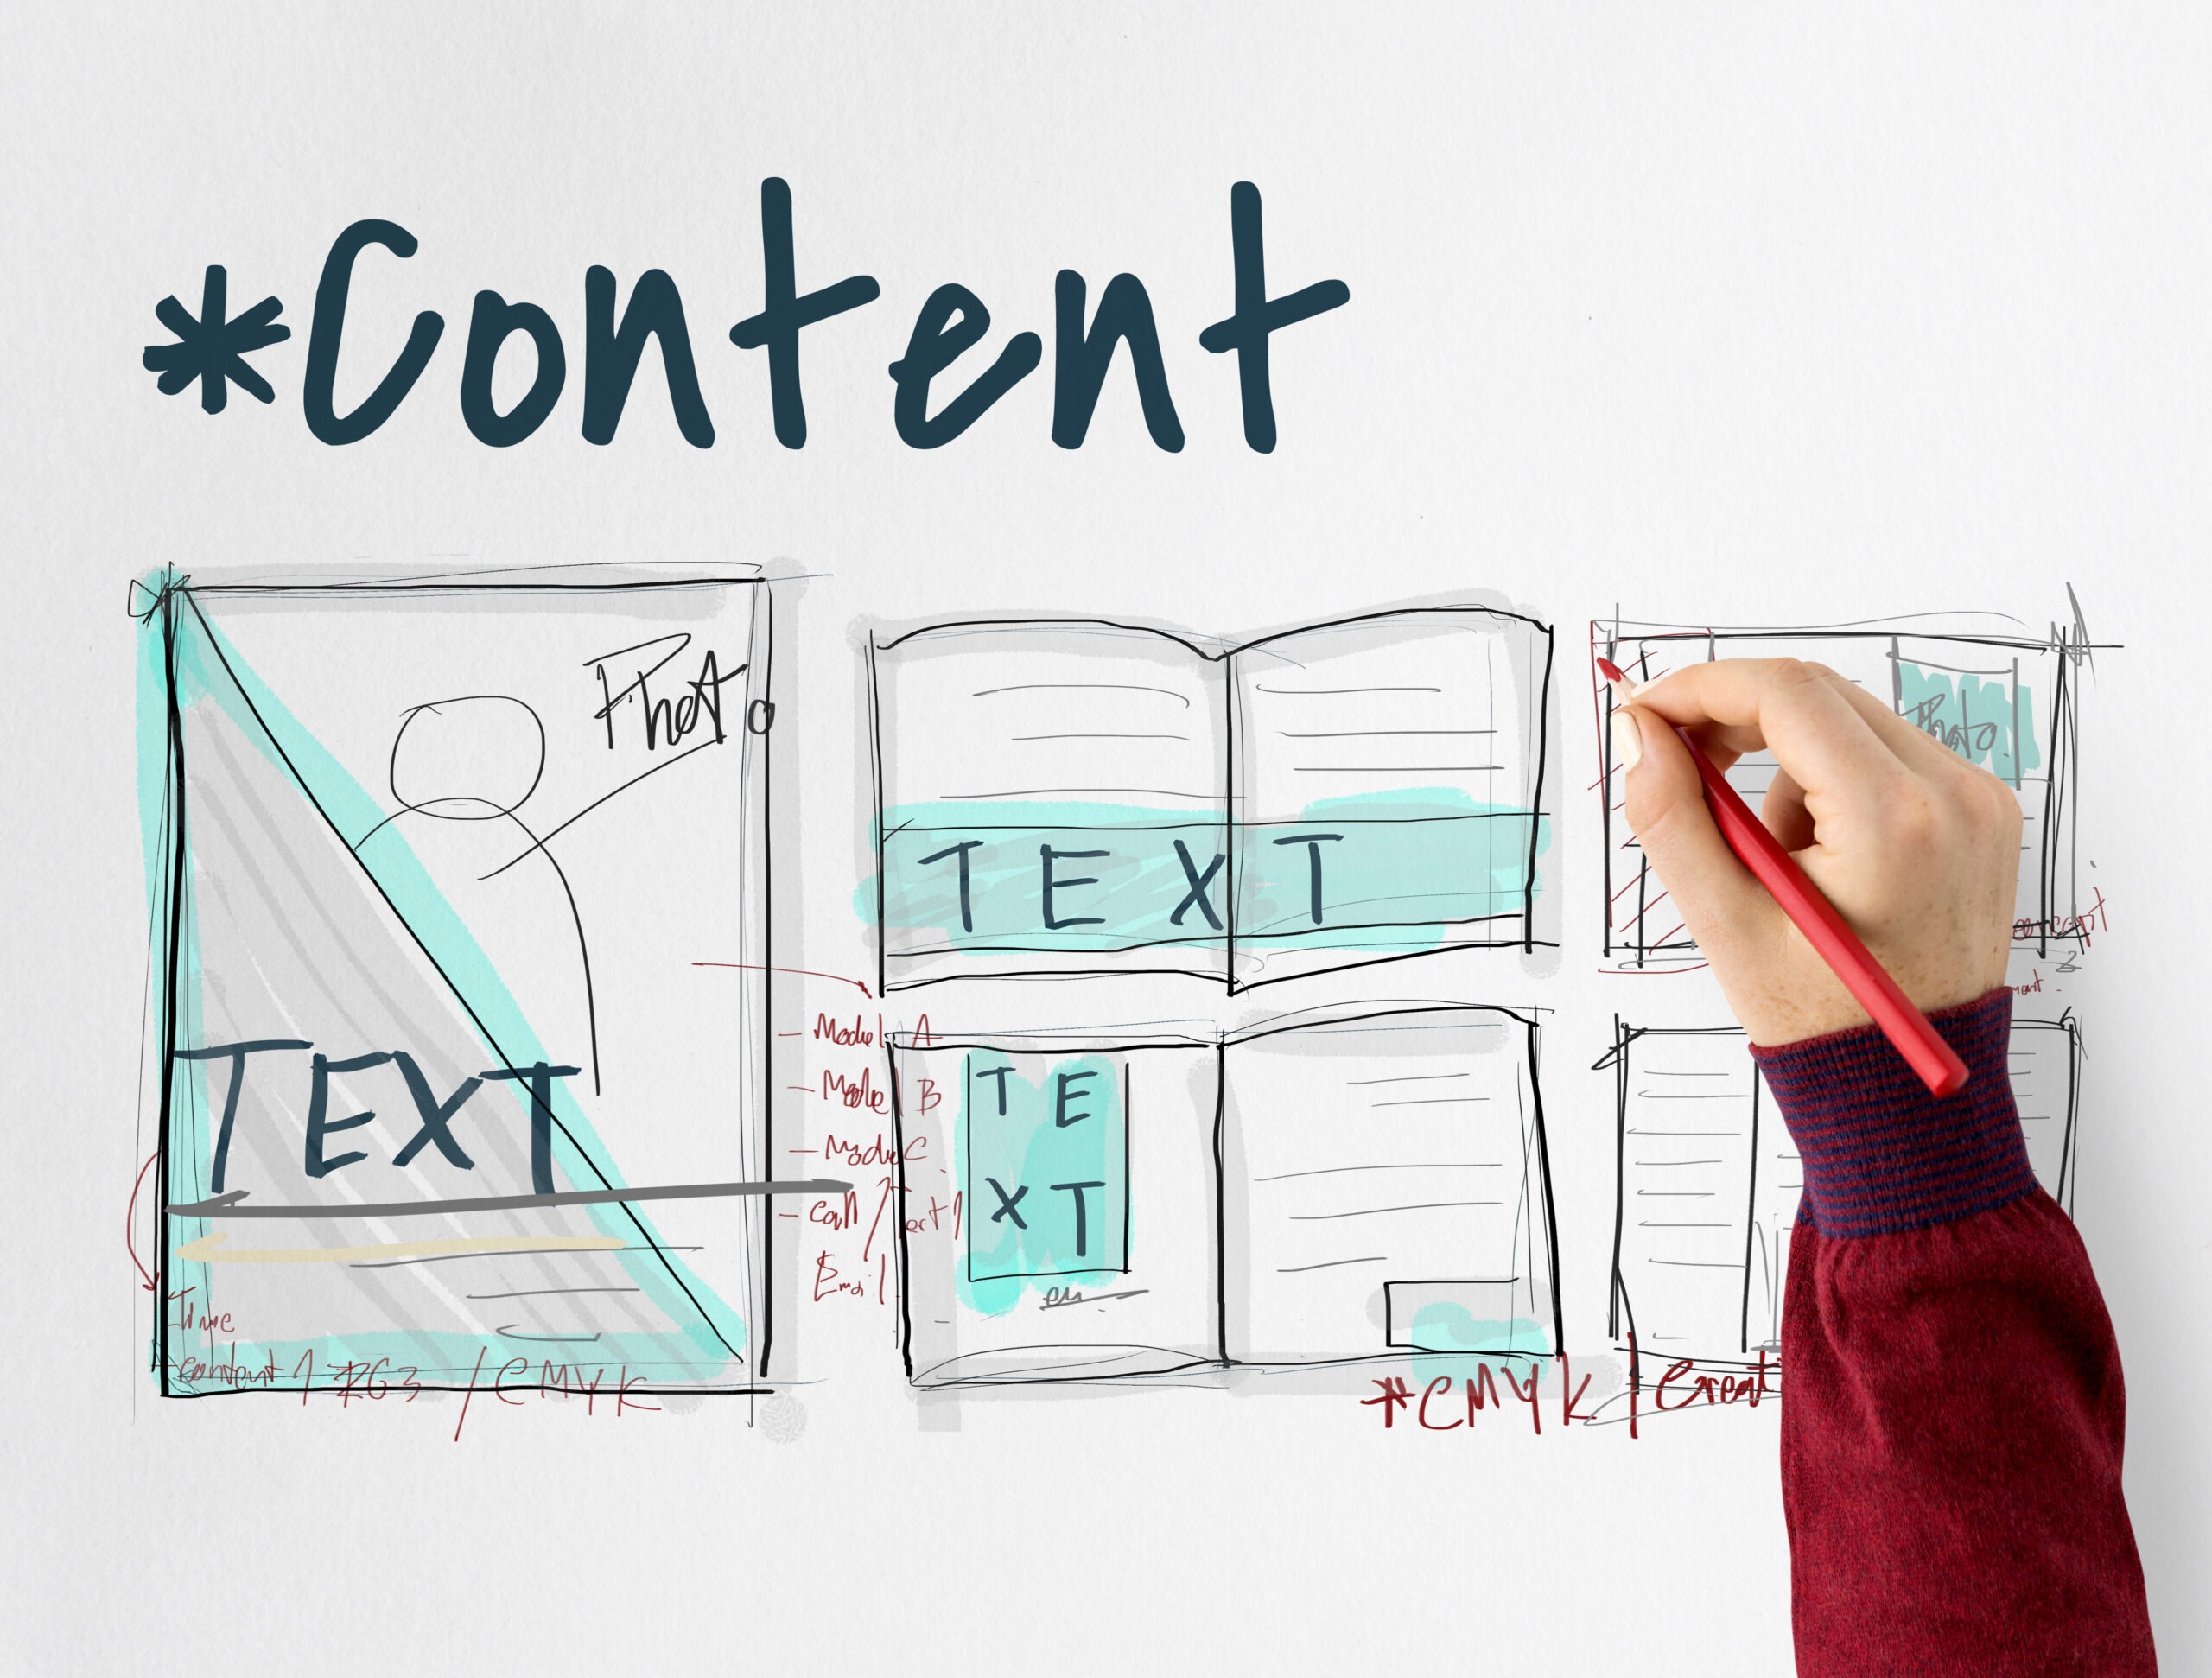 A hand with a red pen writing on an oversized graphic of a website template with the words "content marketing" on top.